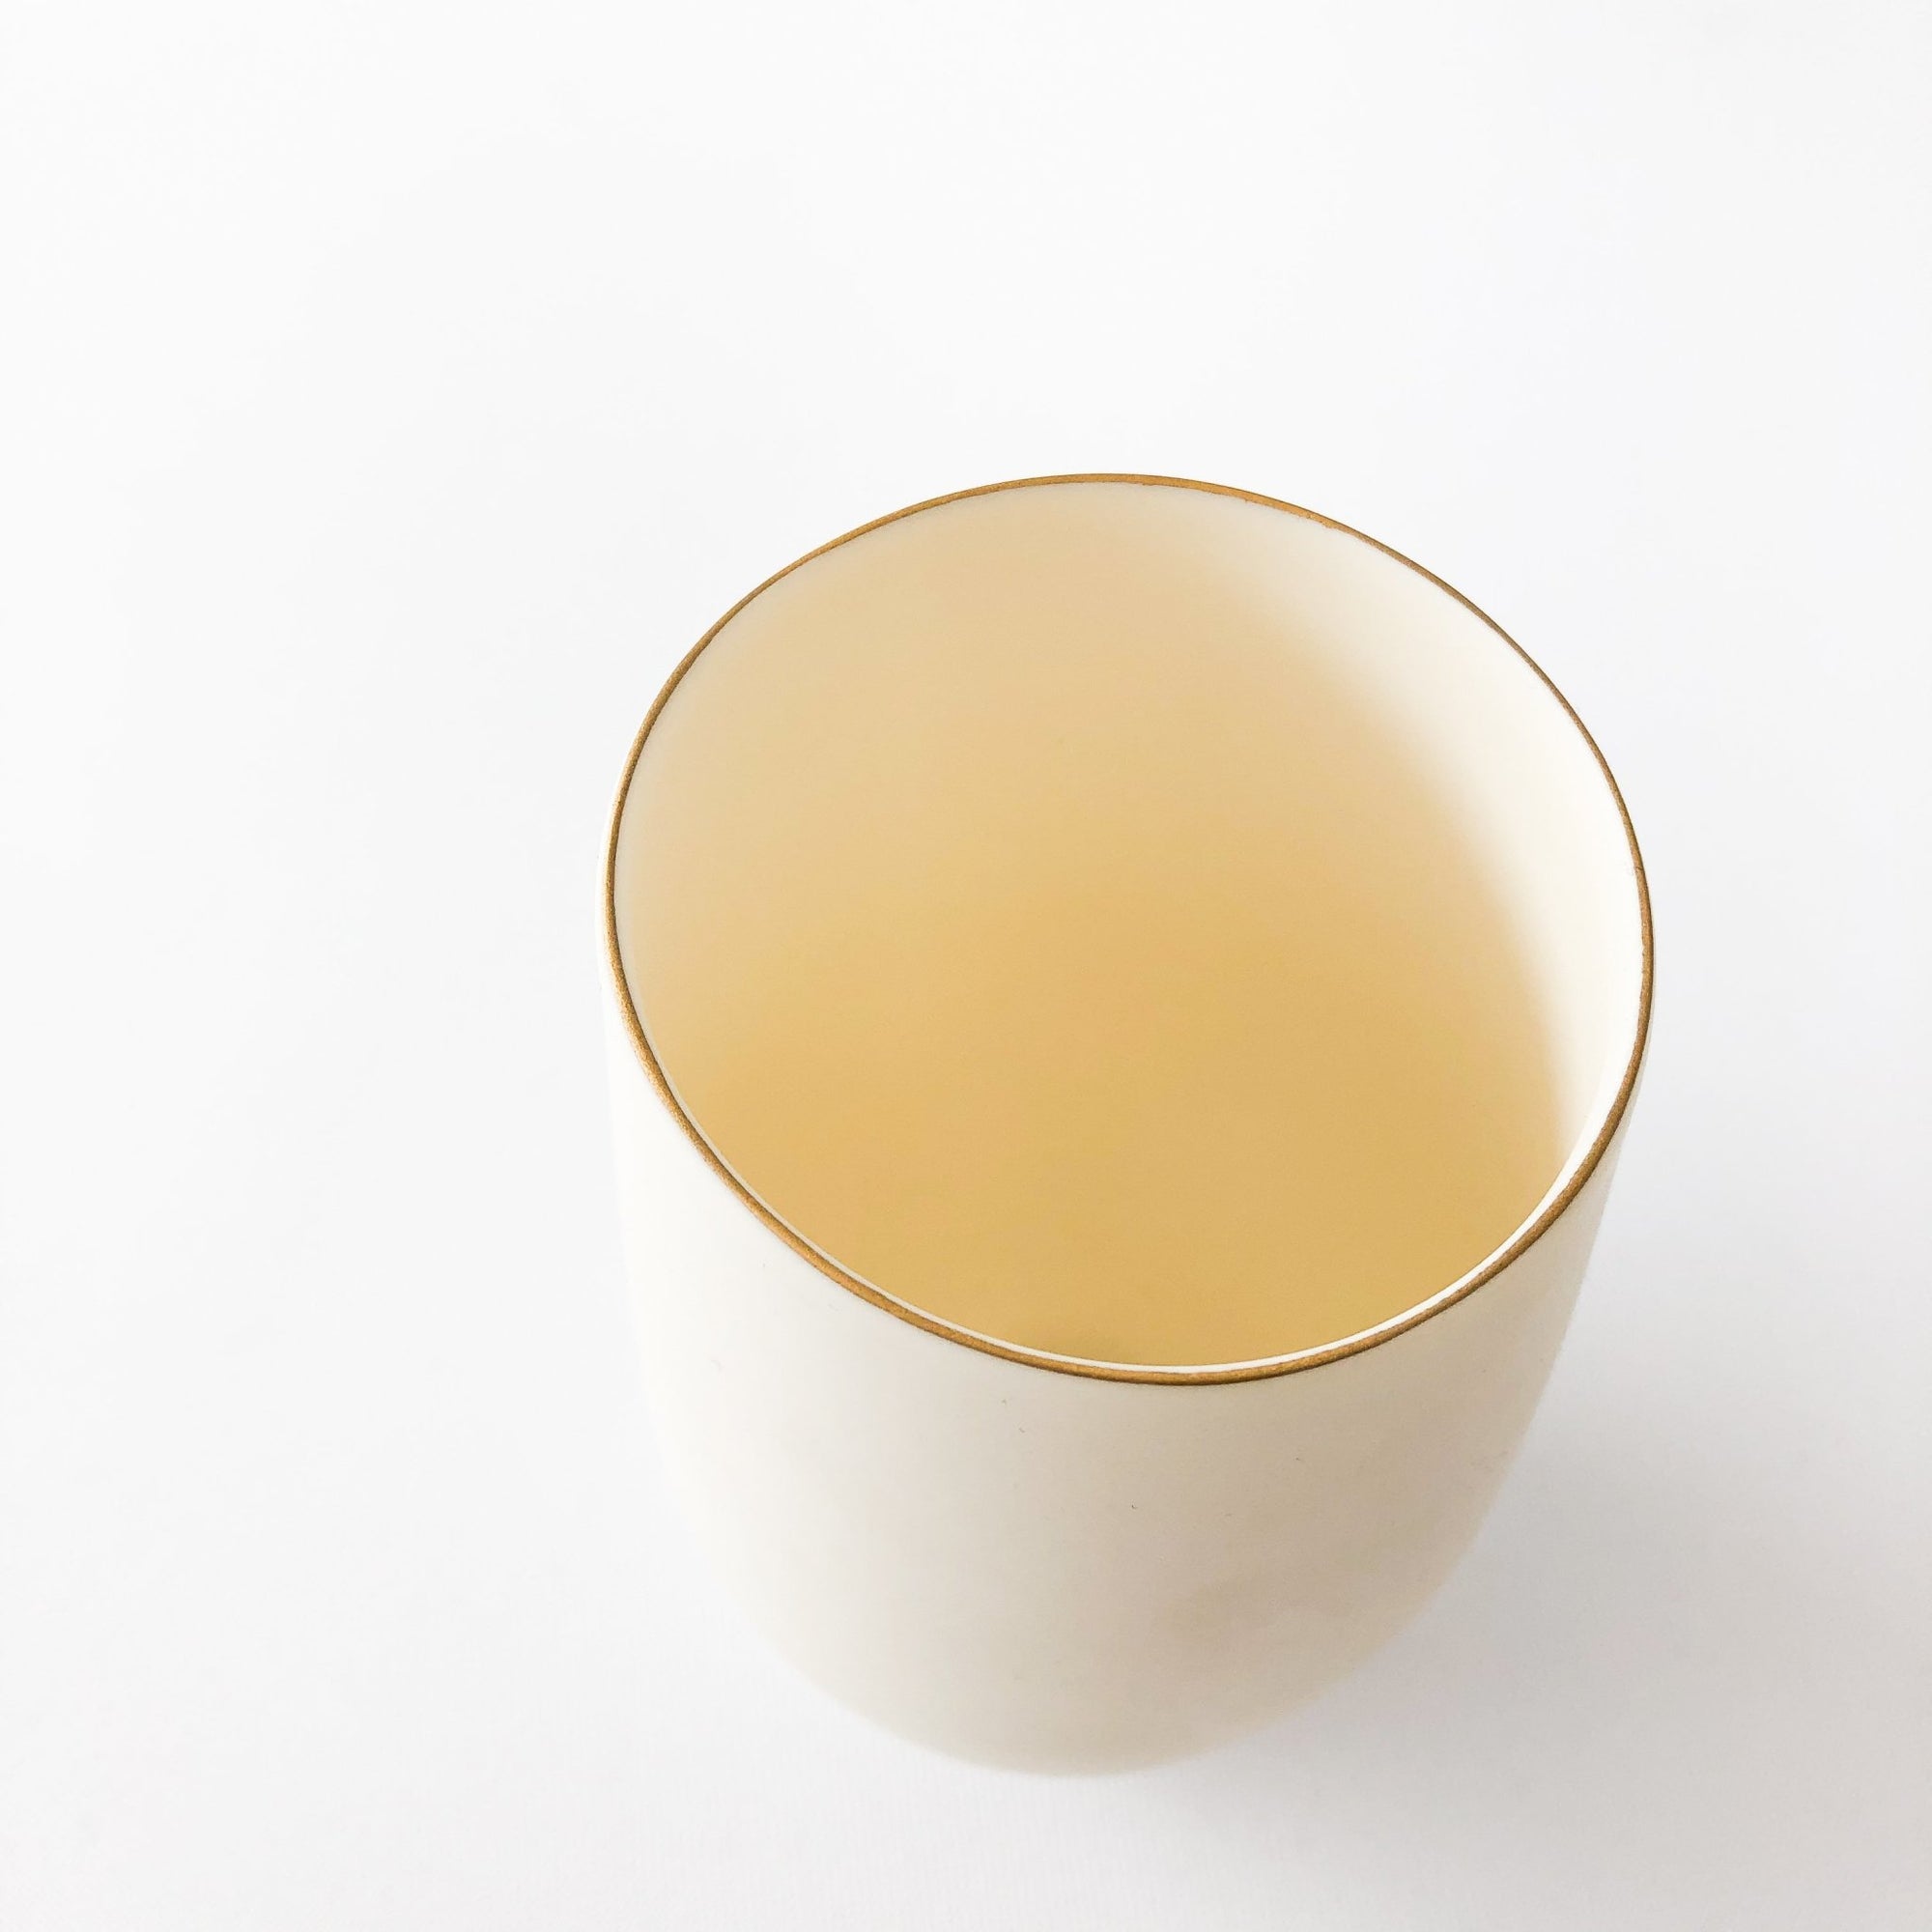 Egg Cup by Ryota Aoki (Large) - tortoise general store